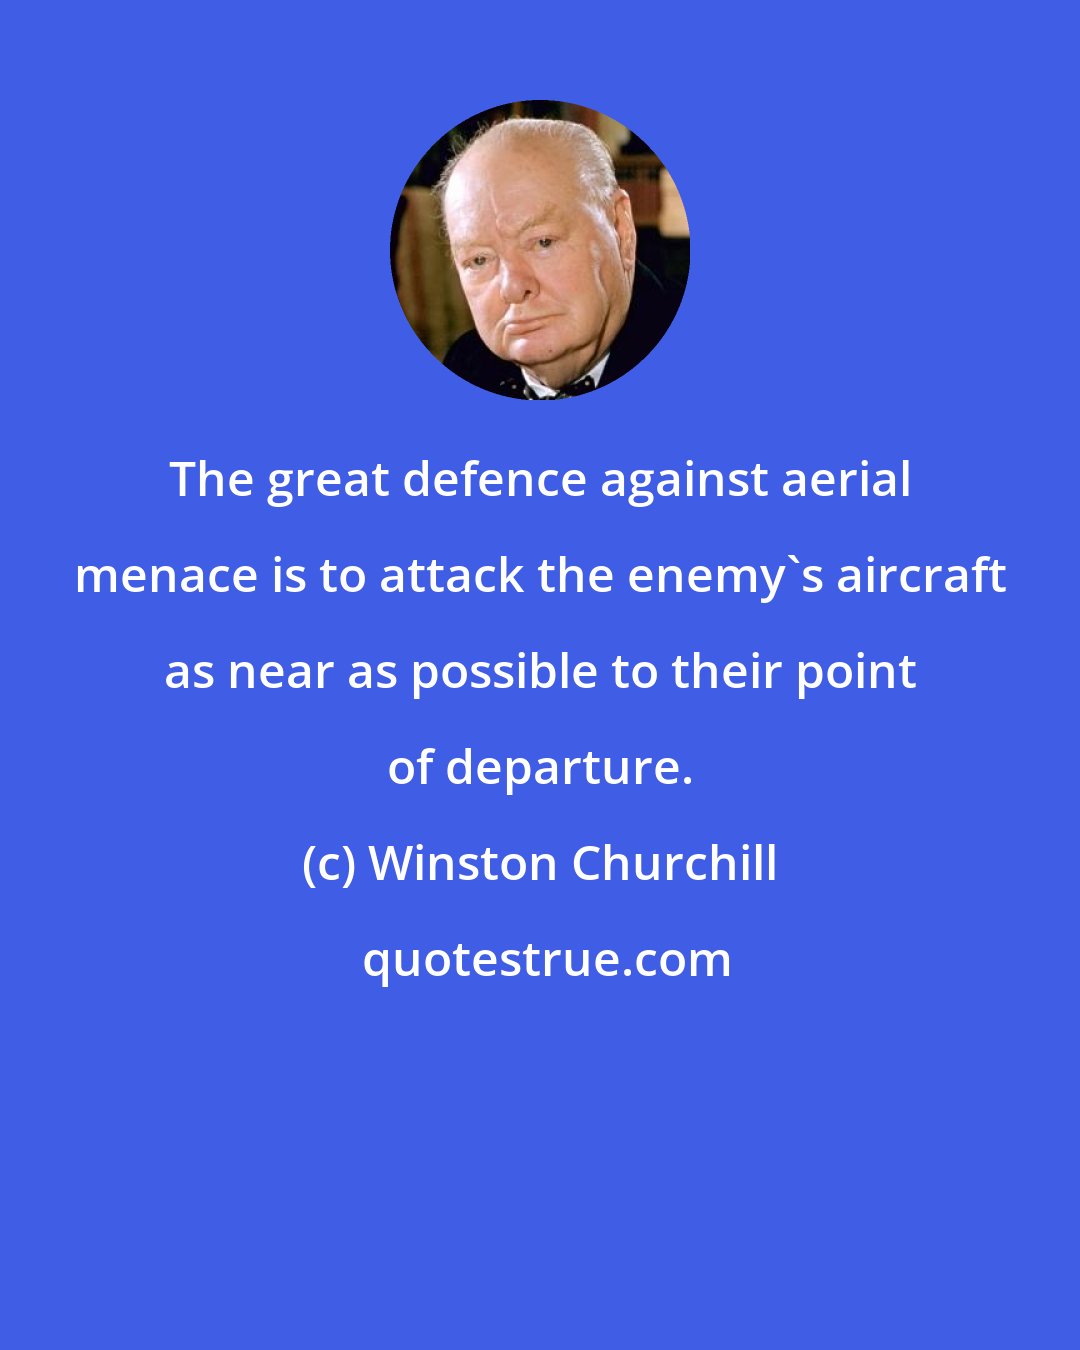 Winston Churchill: The great defence against aerial menace is to attack the enemy's aircraft as near as possible to their point of departure.